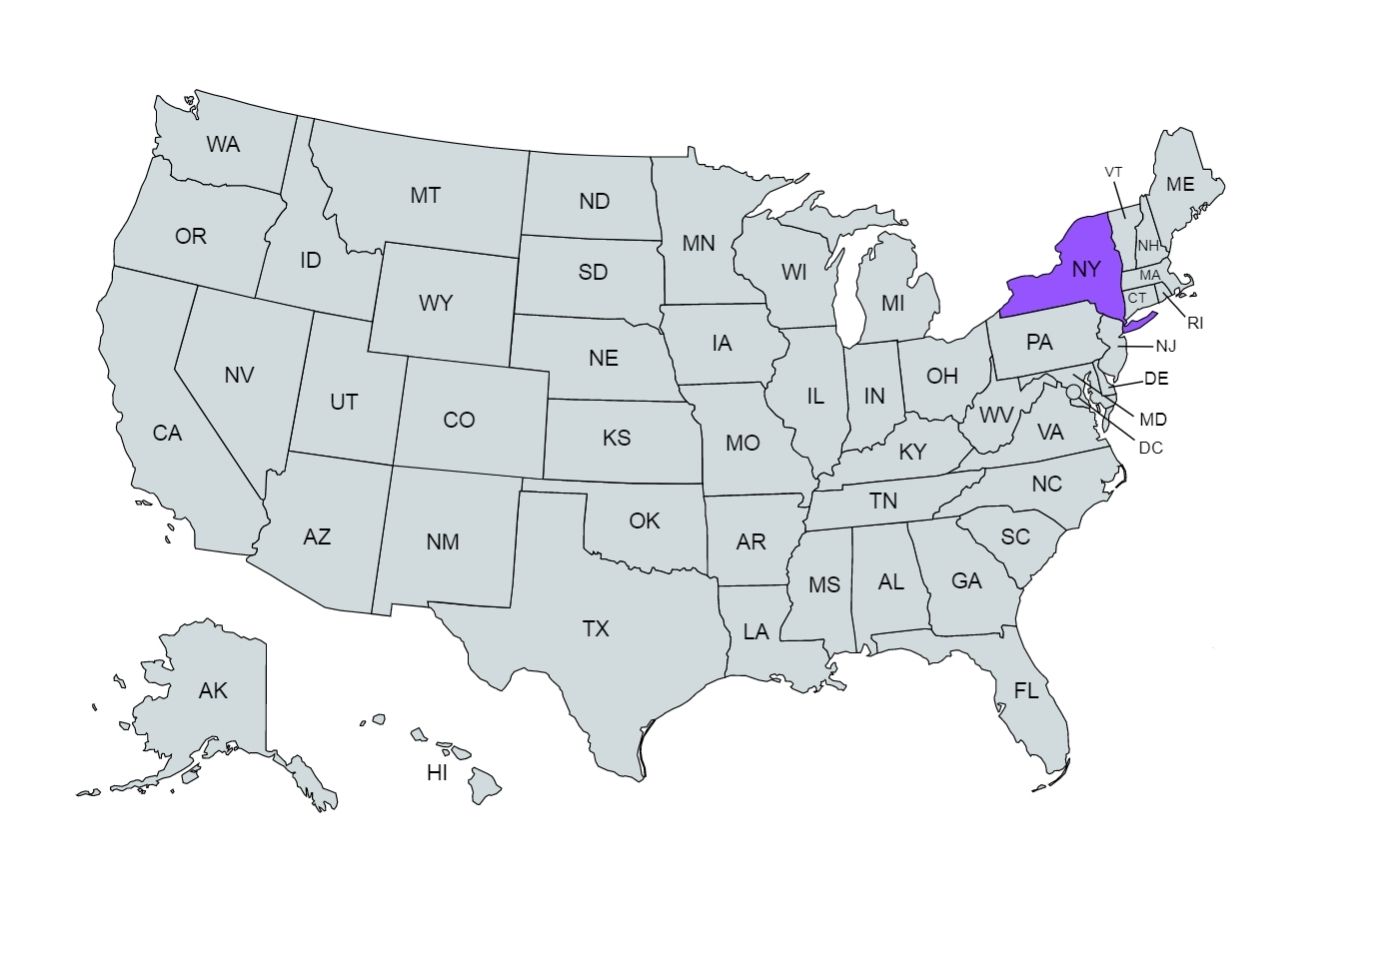 the U.S.A. map with state lines and a New York state marked in purple